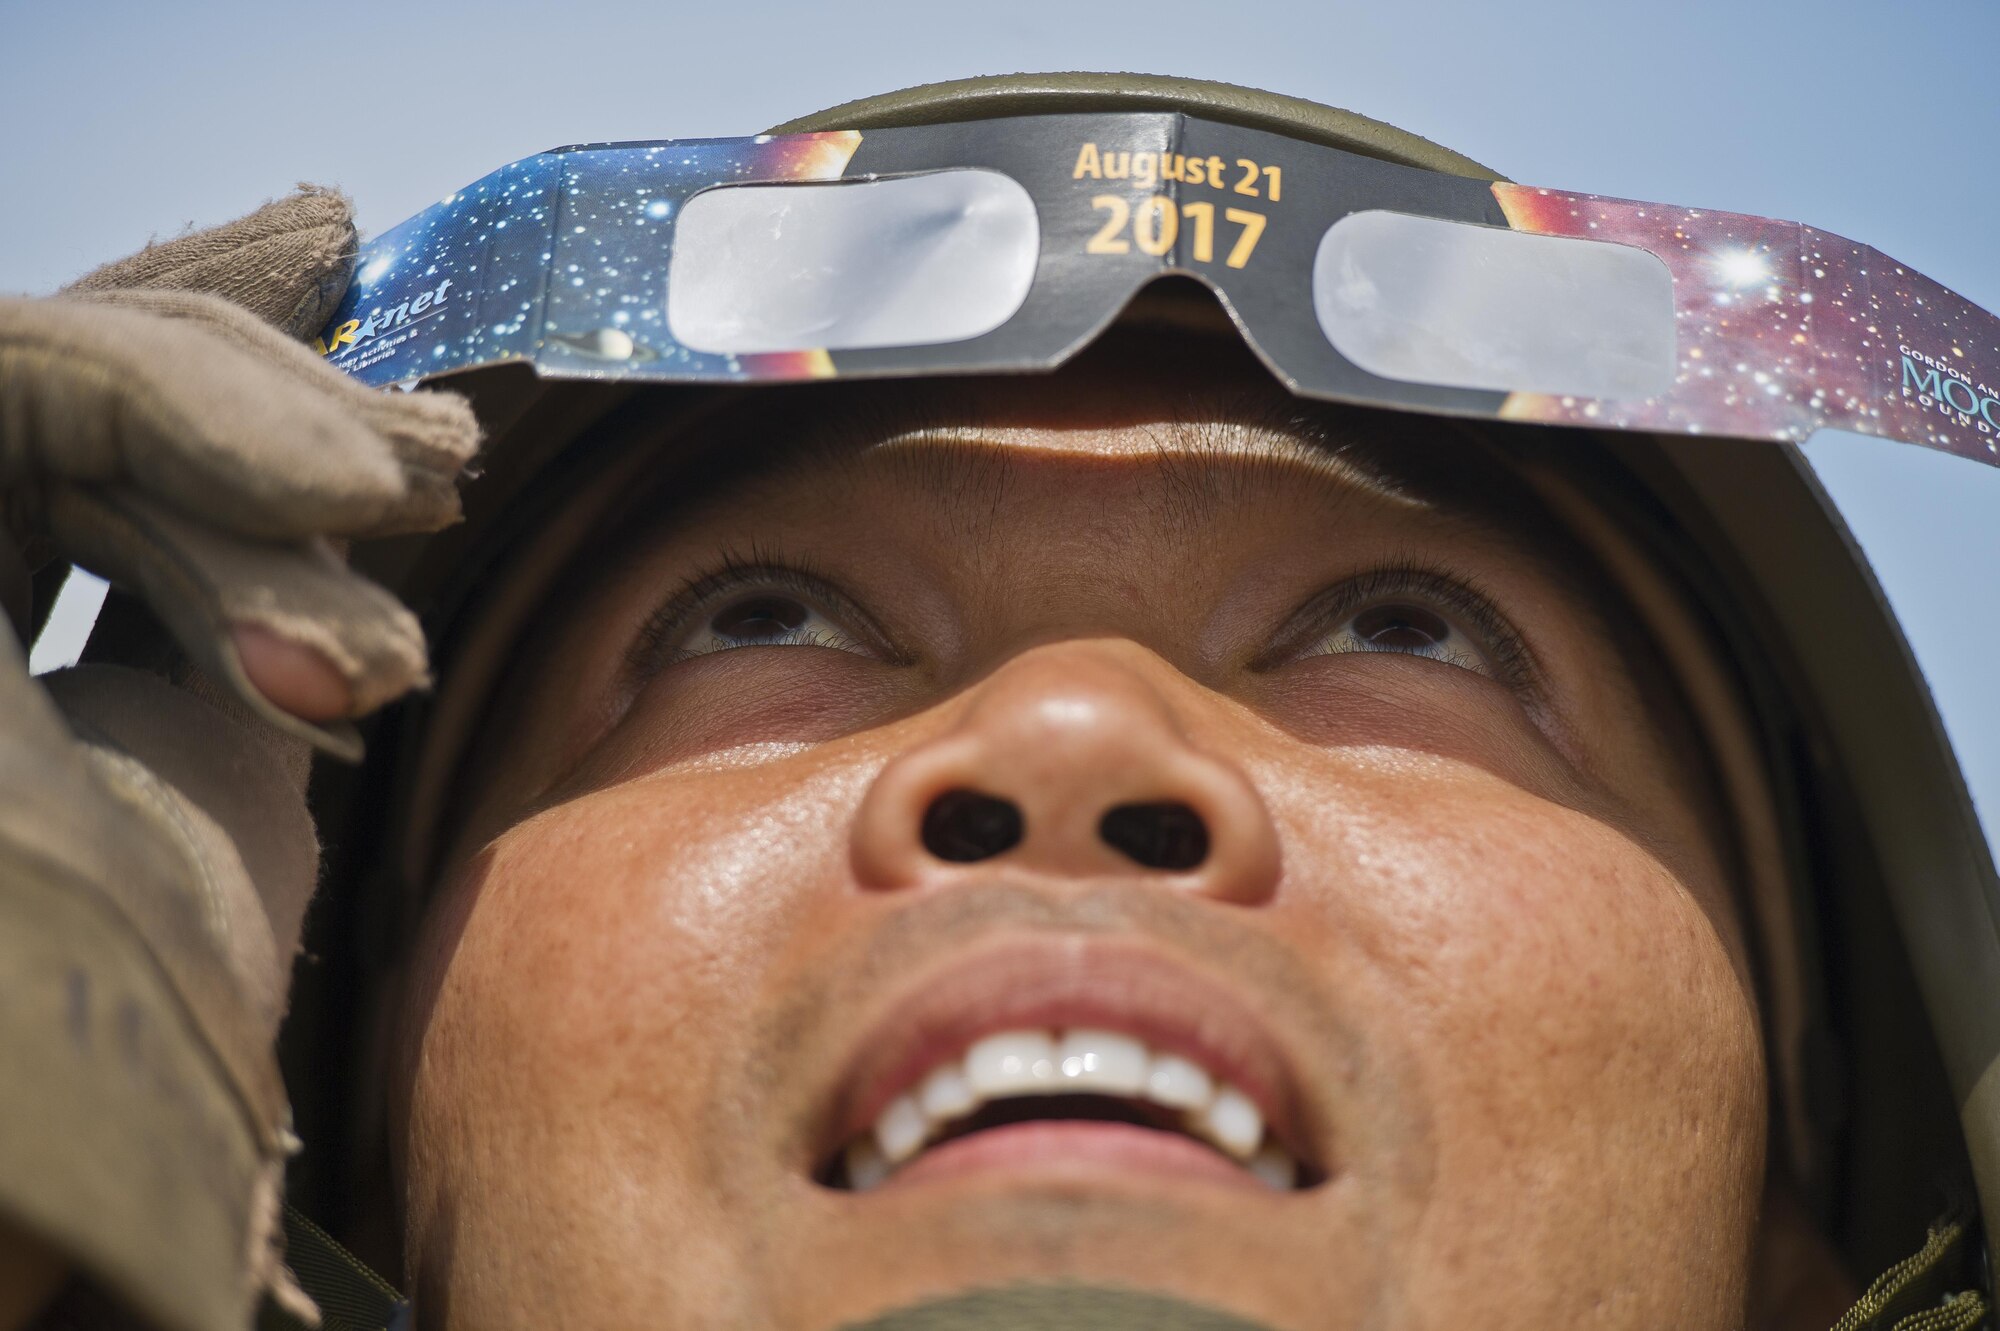 Capt. Vincent Alipio, assigned to the 349th Medical Squadron, Travis Air Force Base, Calif., takes a break during exercise Patriot Warrior to check out the total solar eclipse at Young Air Assault Strip, Fort McCoy, Wis., Aug. 21, 2017. This was the first total solar eclipse in 38 years. (U.S. Air Force photo by Tech. Sgt. Efren Lopez)